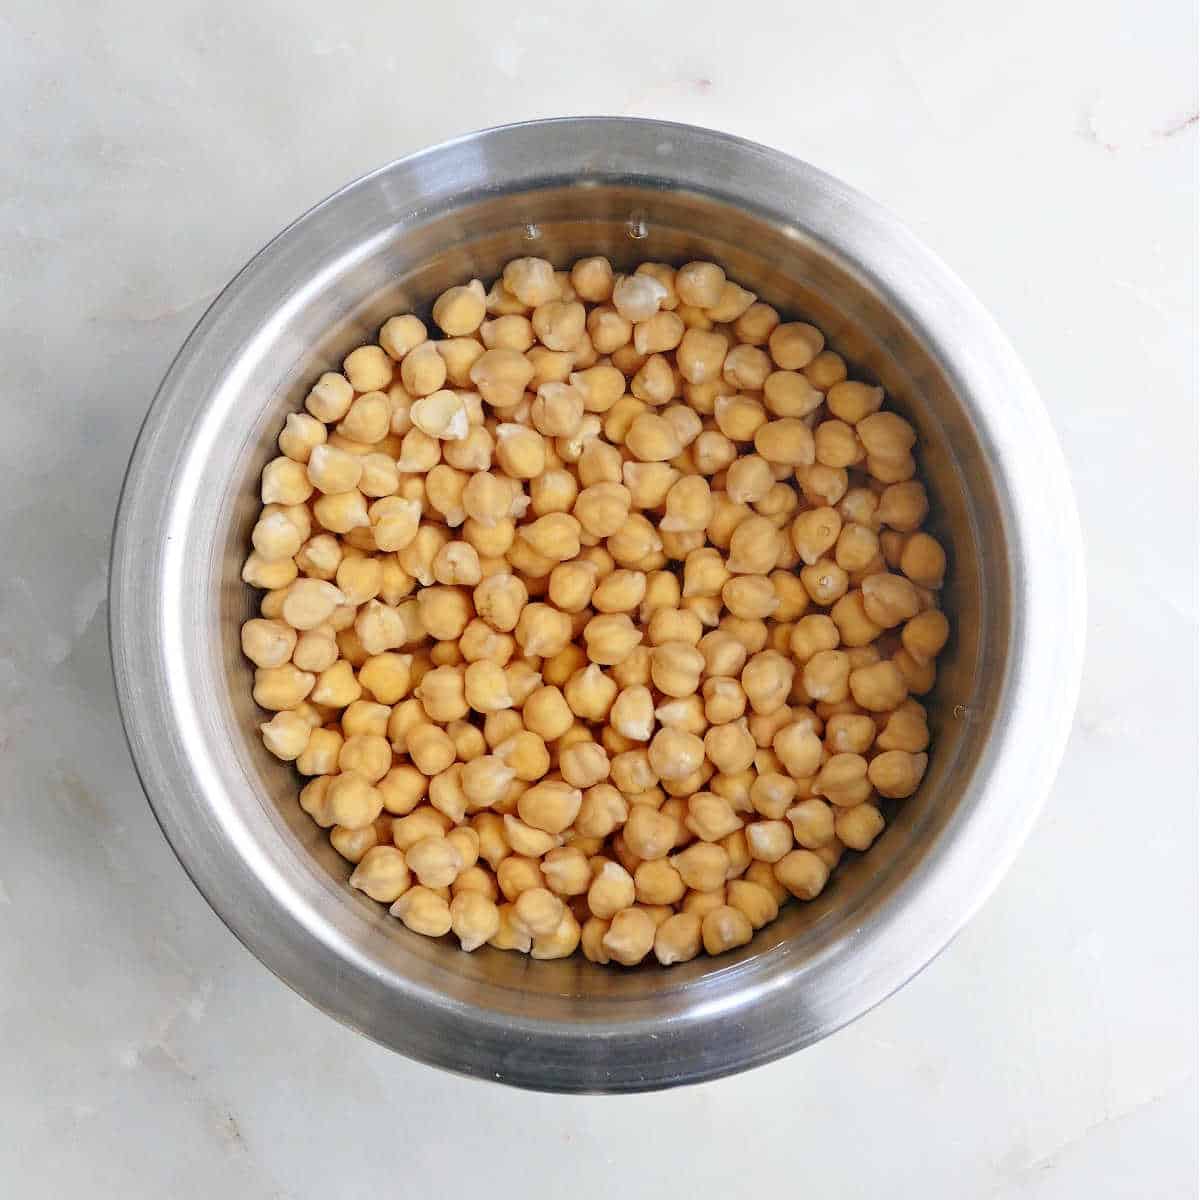 dried garbanzo beans soaking in a bowl of water on a counter